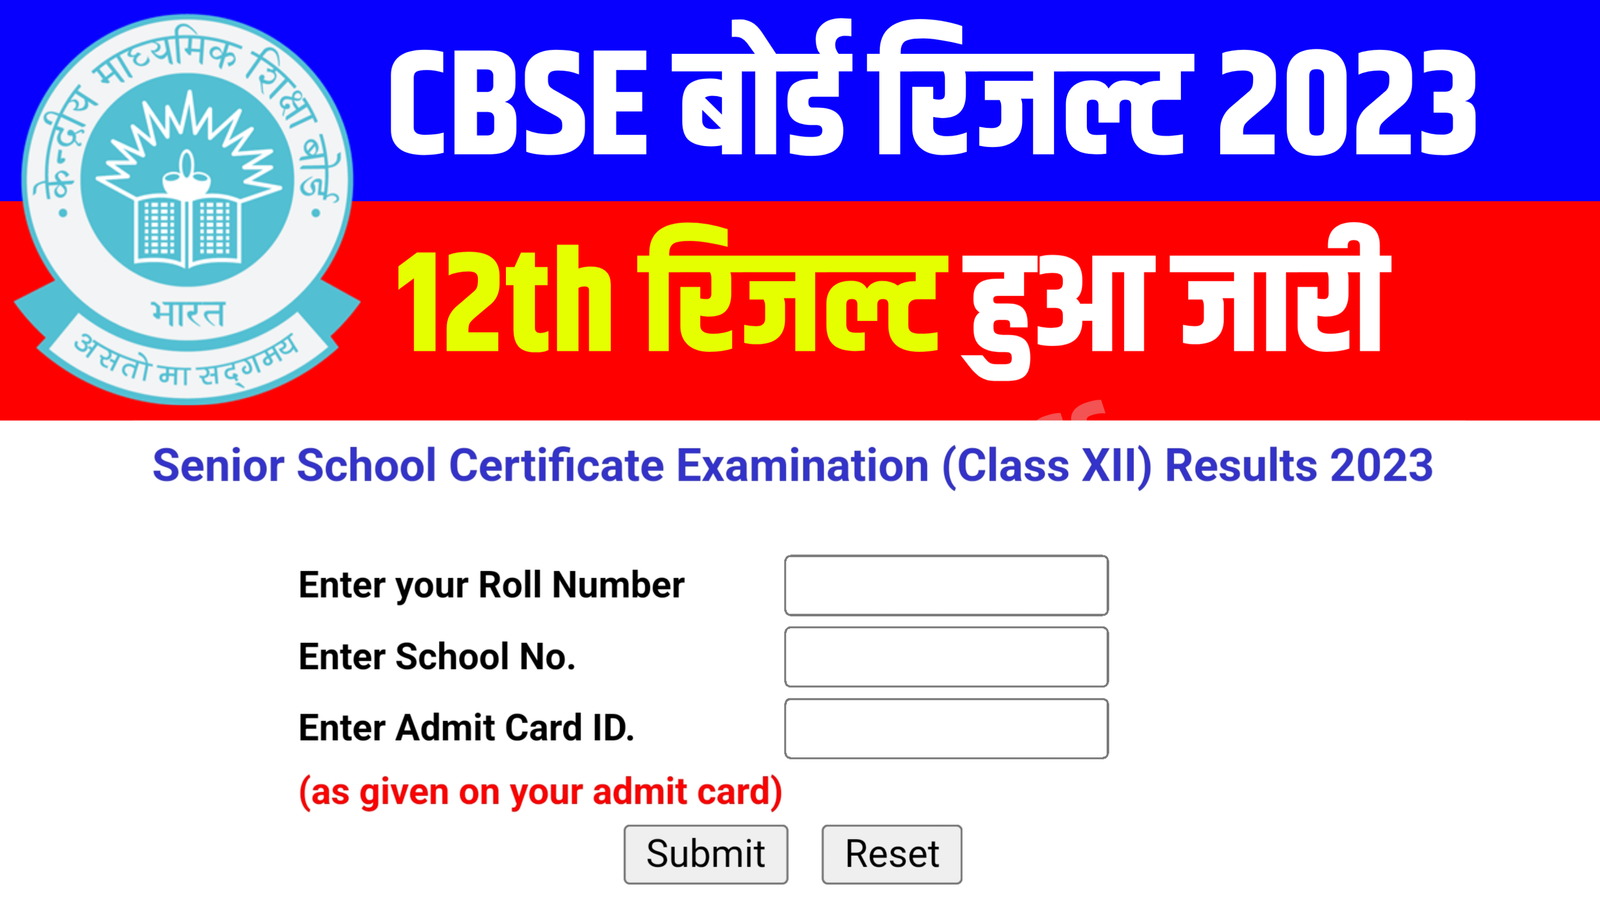 CBSE Board 12th Result Announced Today